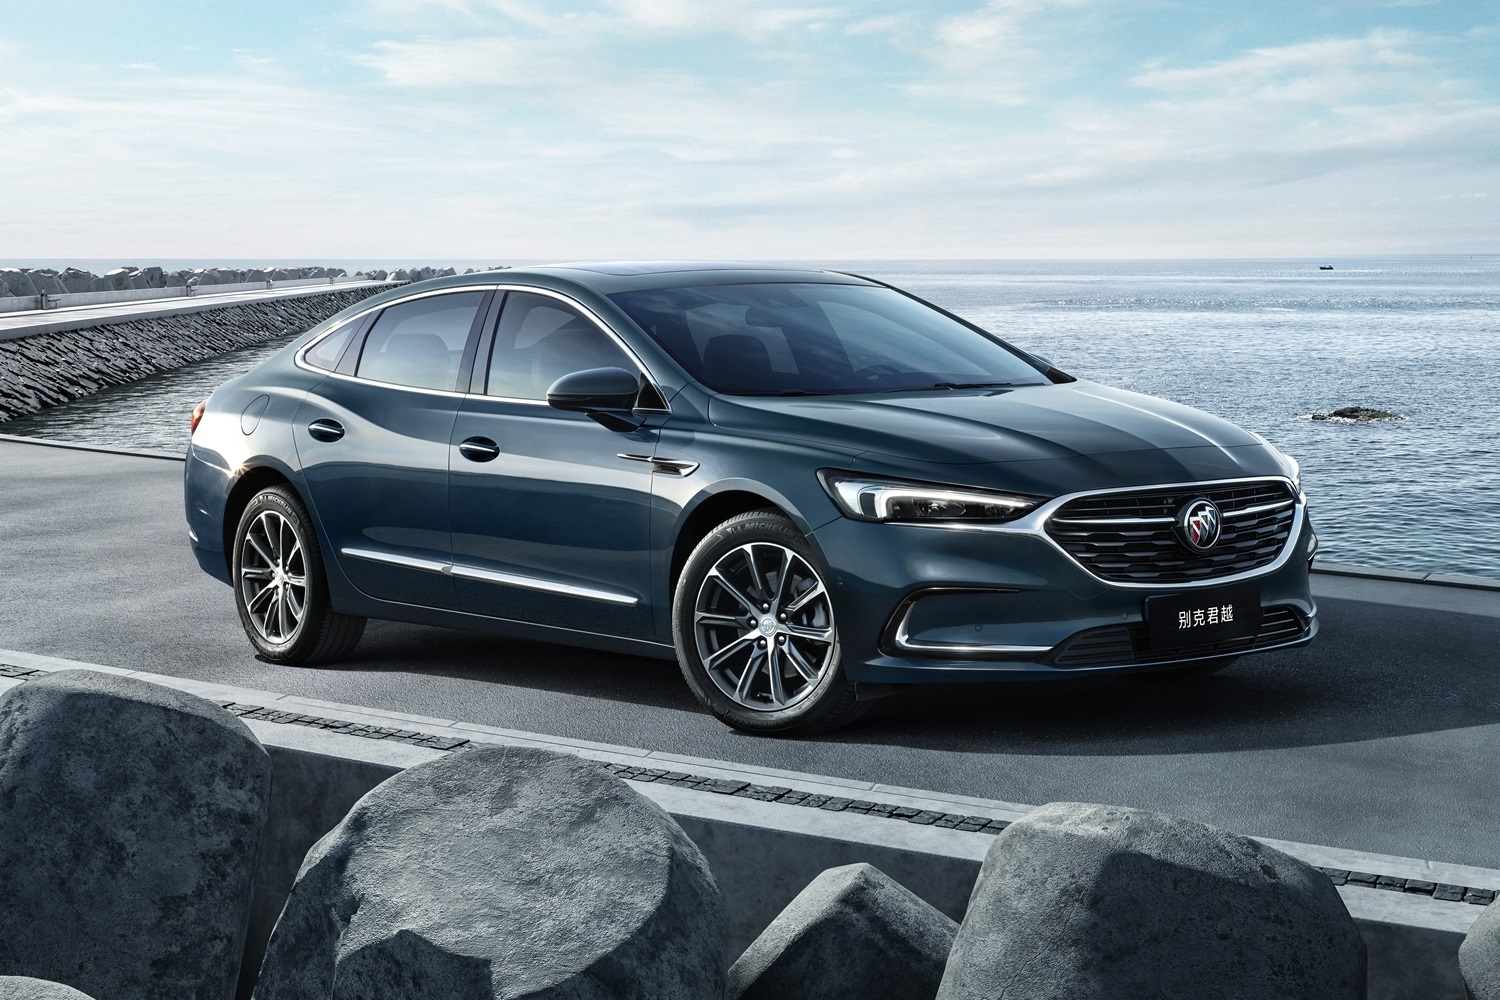 2021 Buick LaCrosse Arrives at Chinese Dealerships The News Wheel